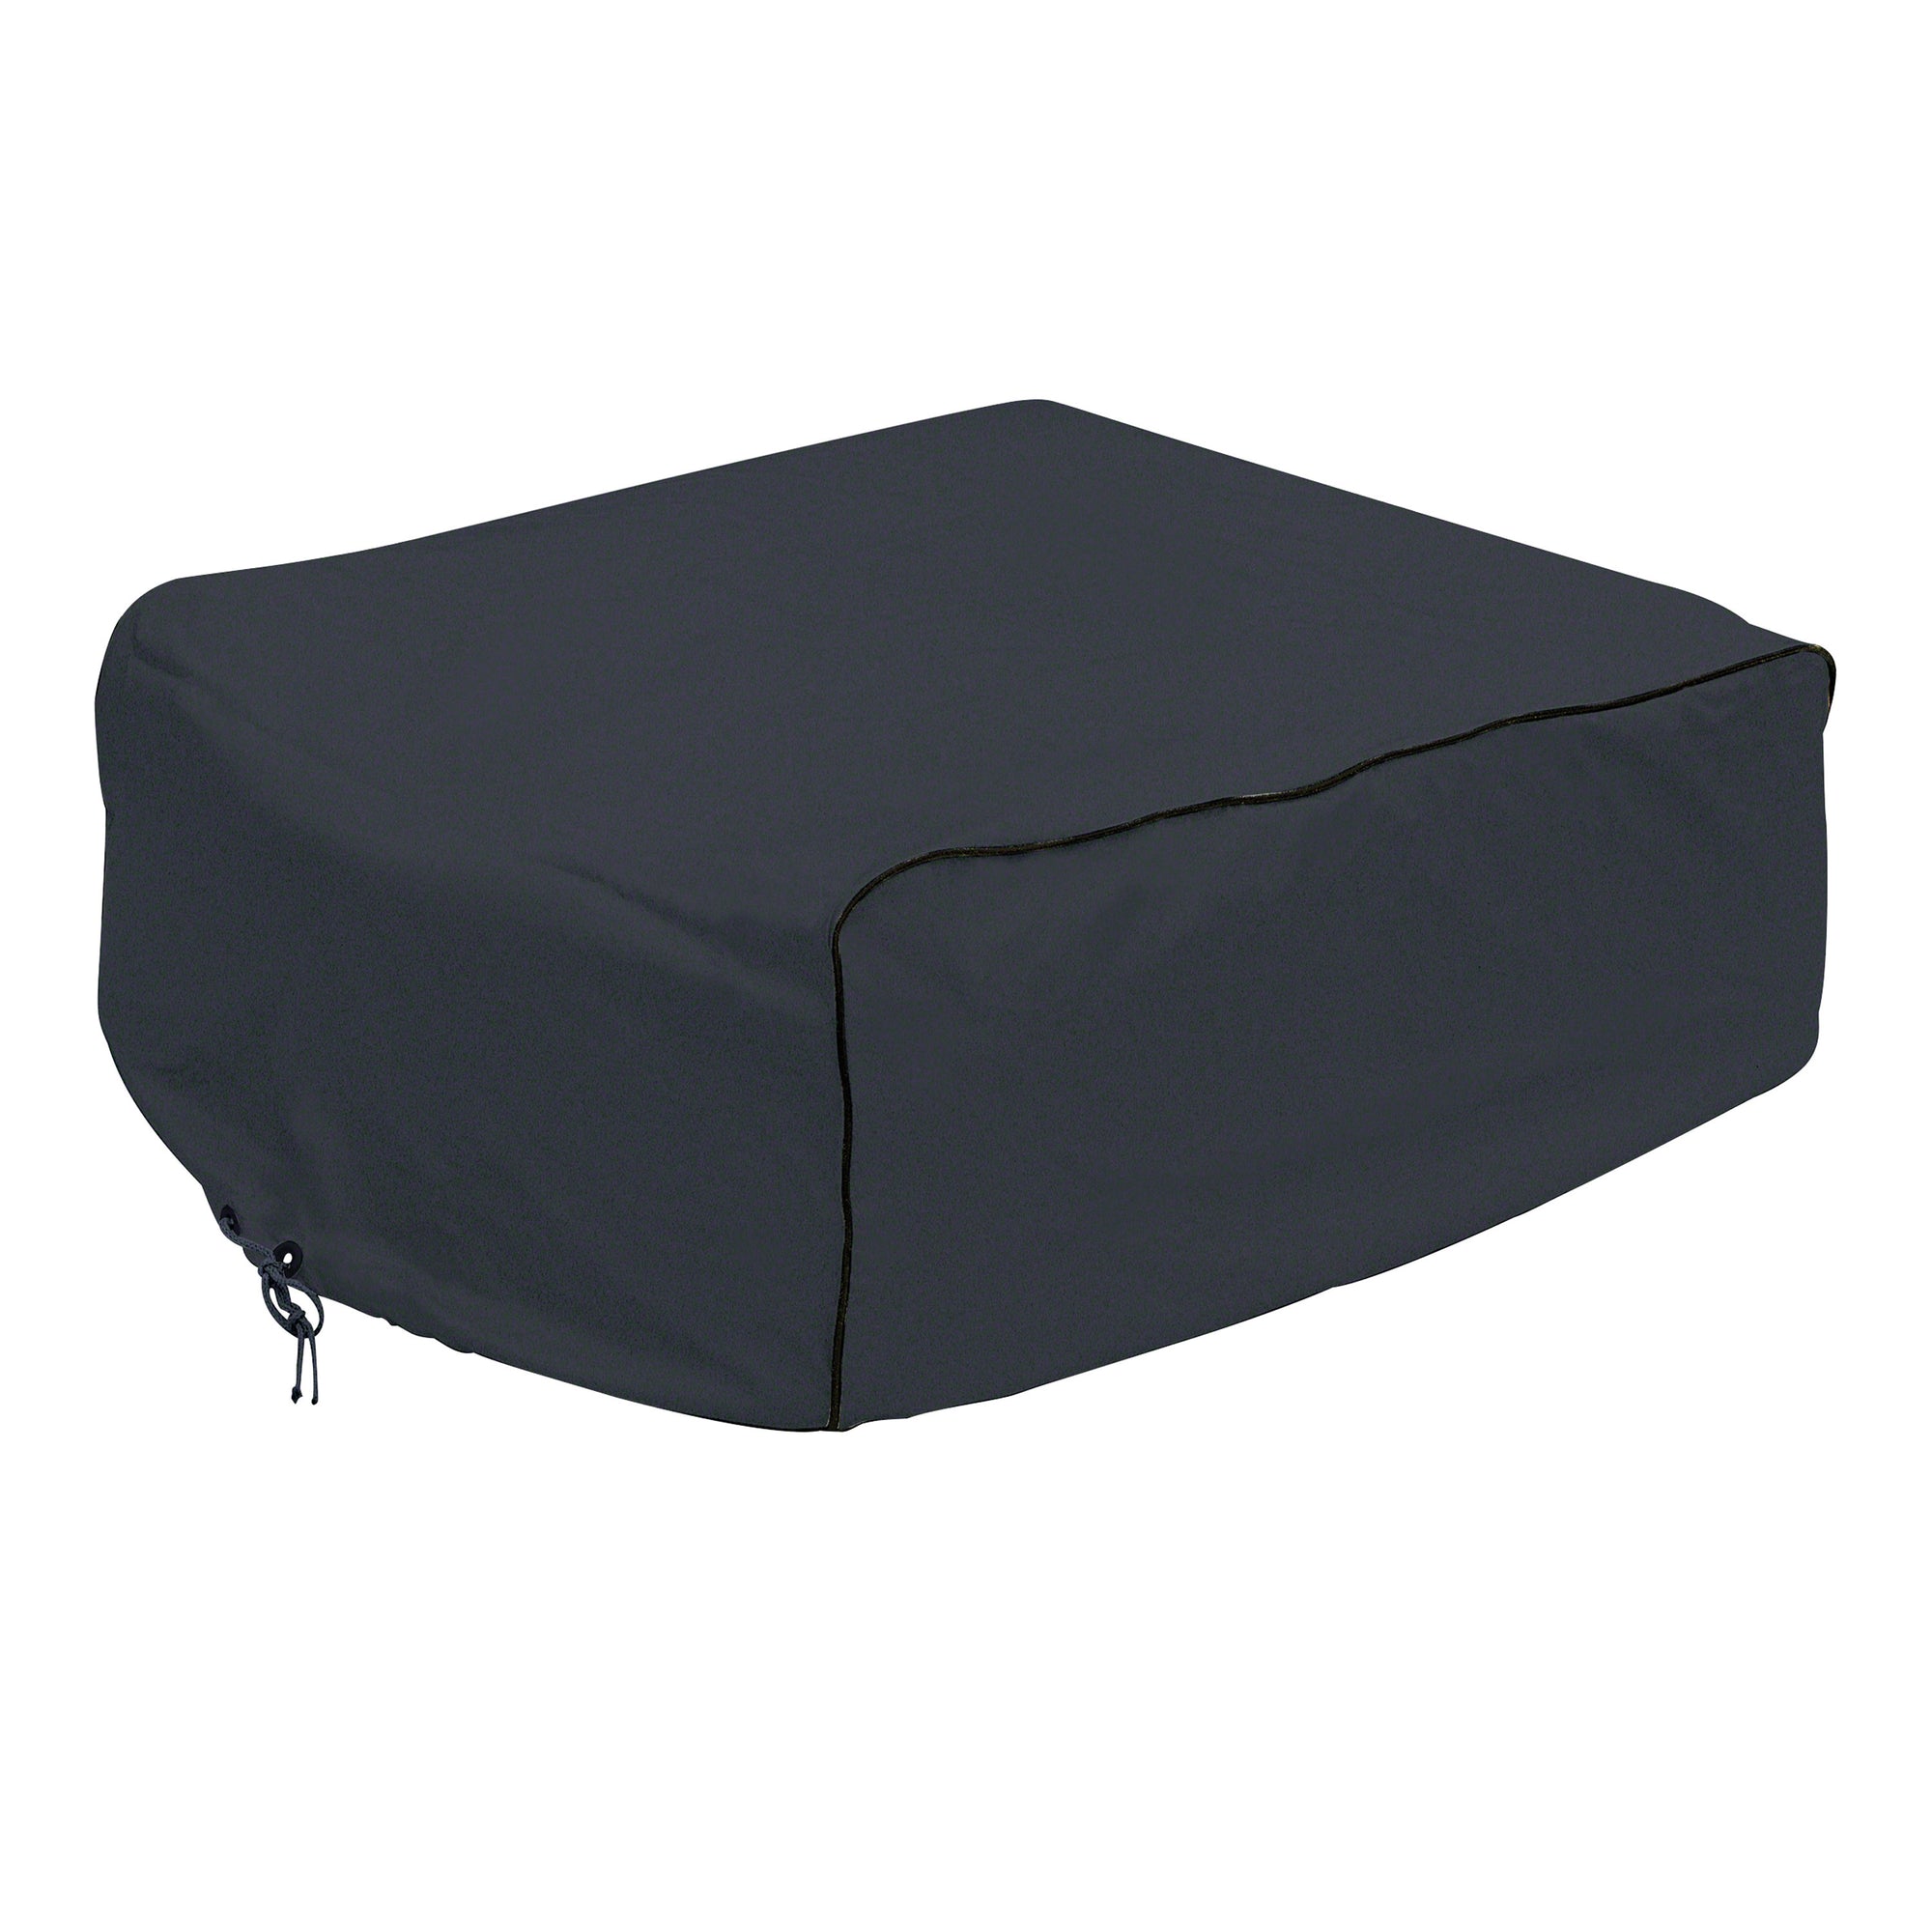 Classic Accessories 80-250 A/C Cover For Atwood Air Command - Black